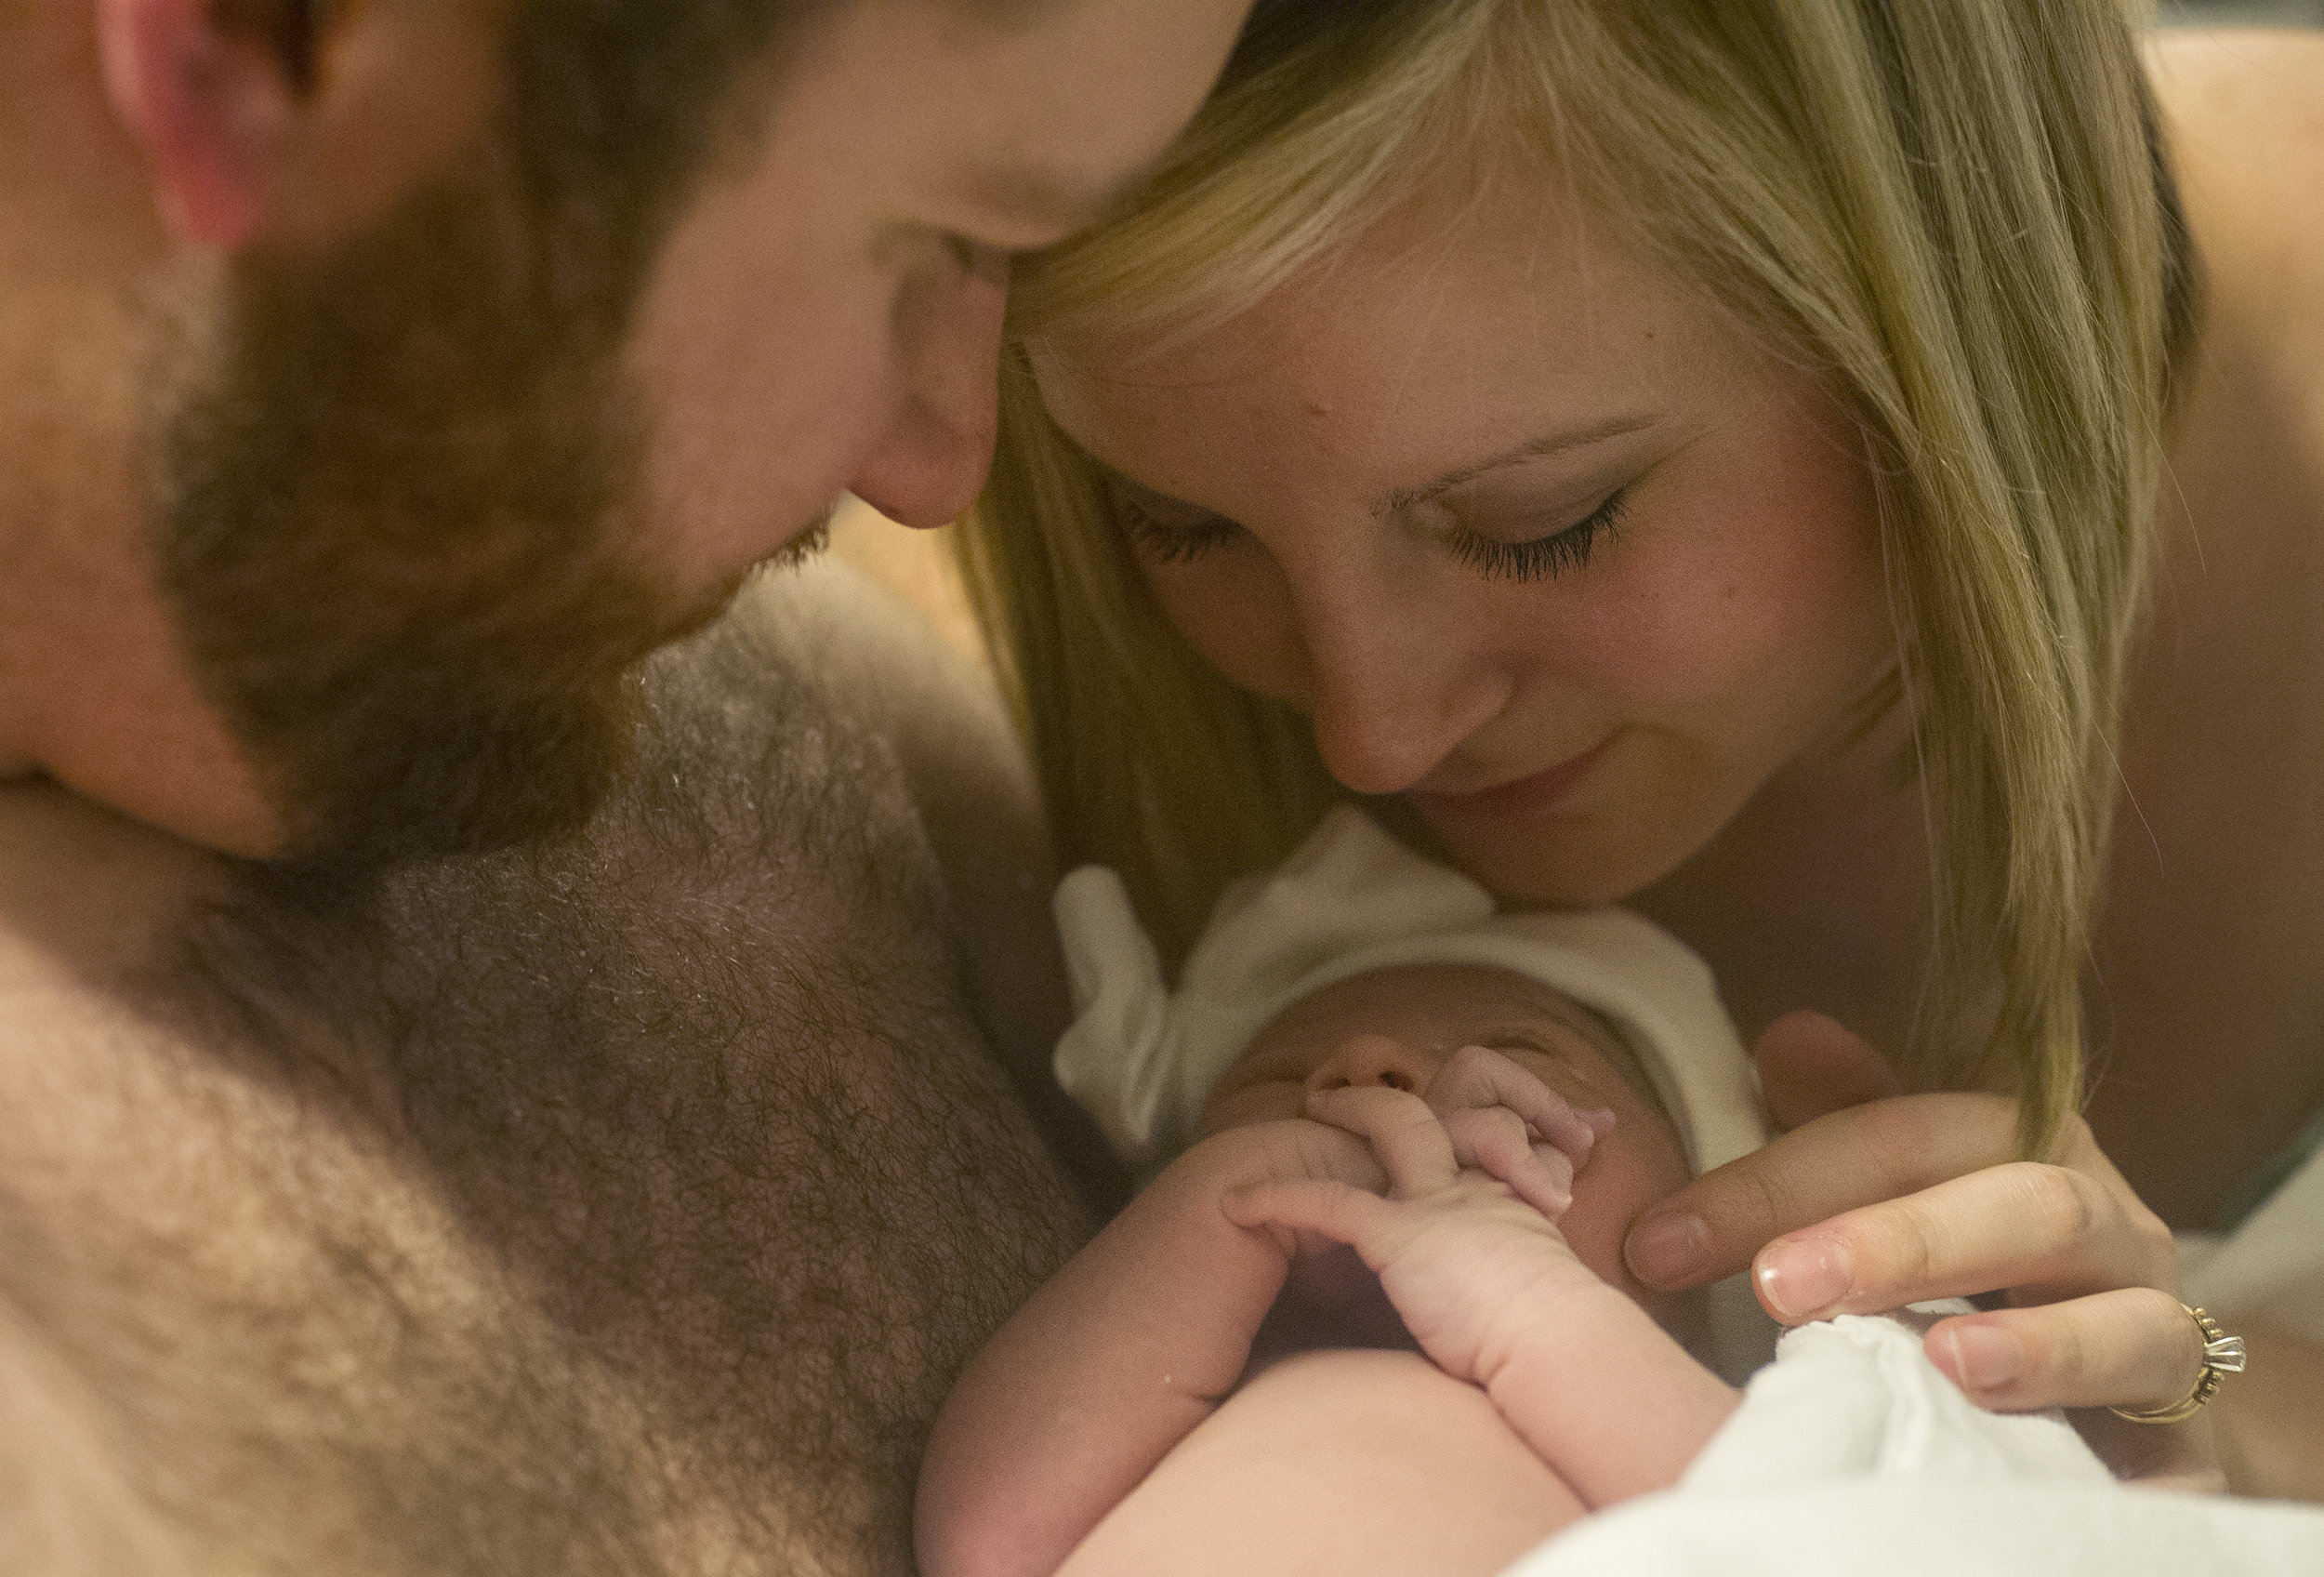  Michael and Erickia hold their daughter skin-to-skin together for the first time after she is born at St. Mary's Medical Center in Evansville Monday Dec. 1, 2014.   